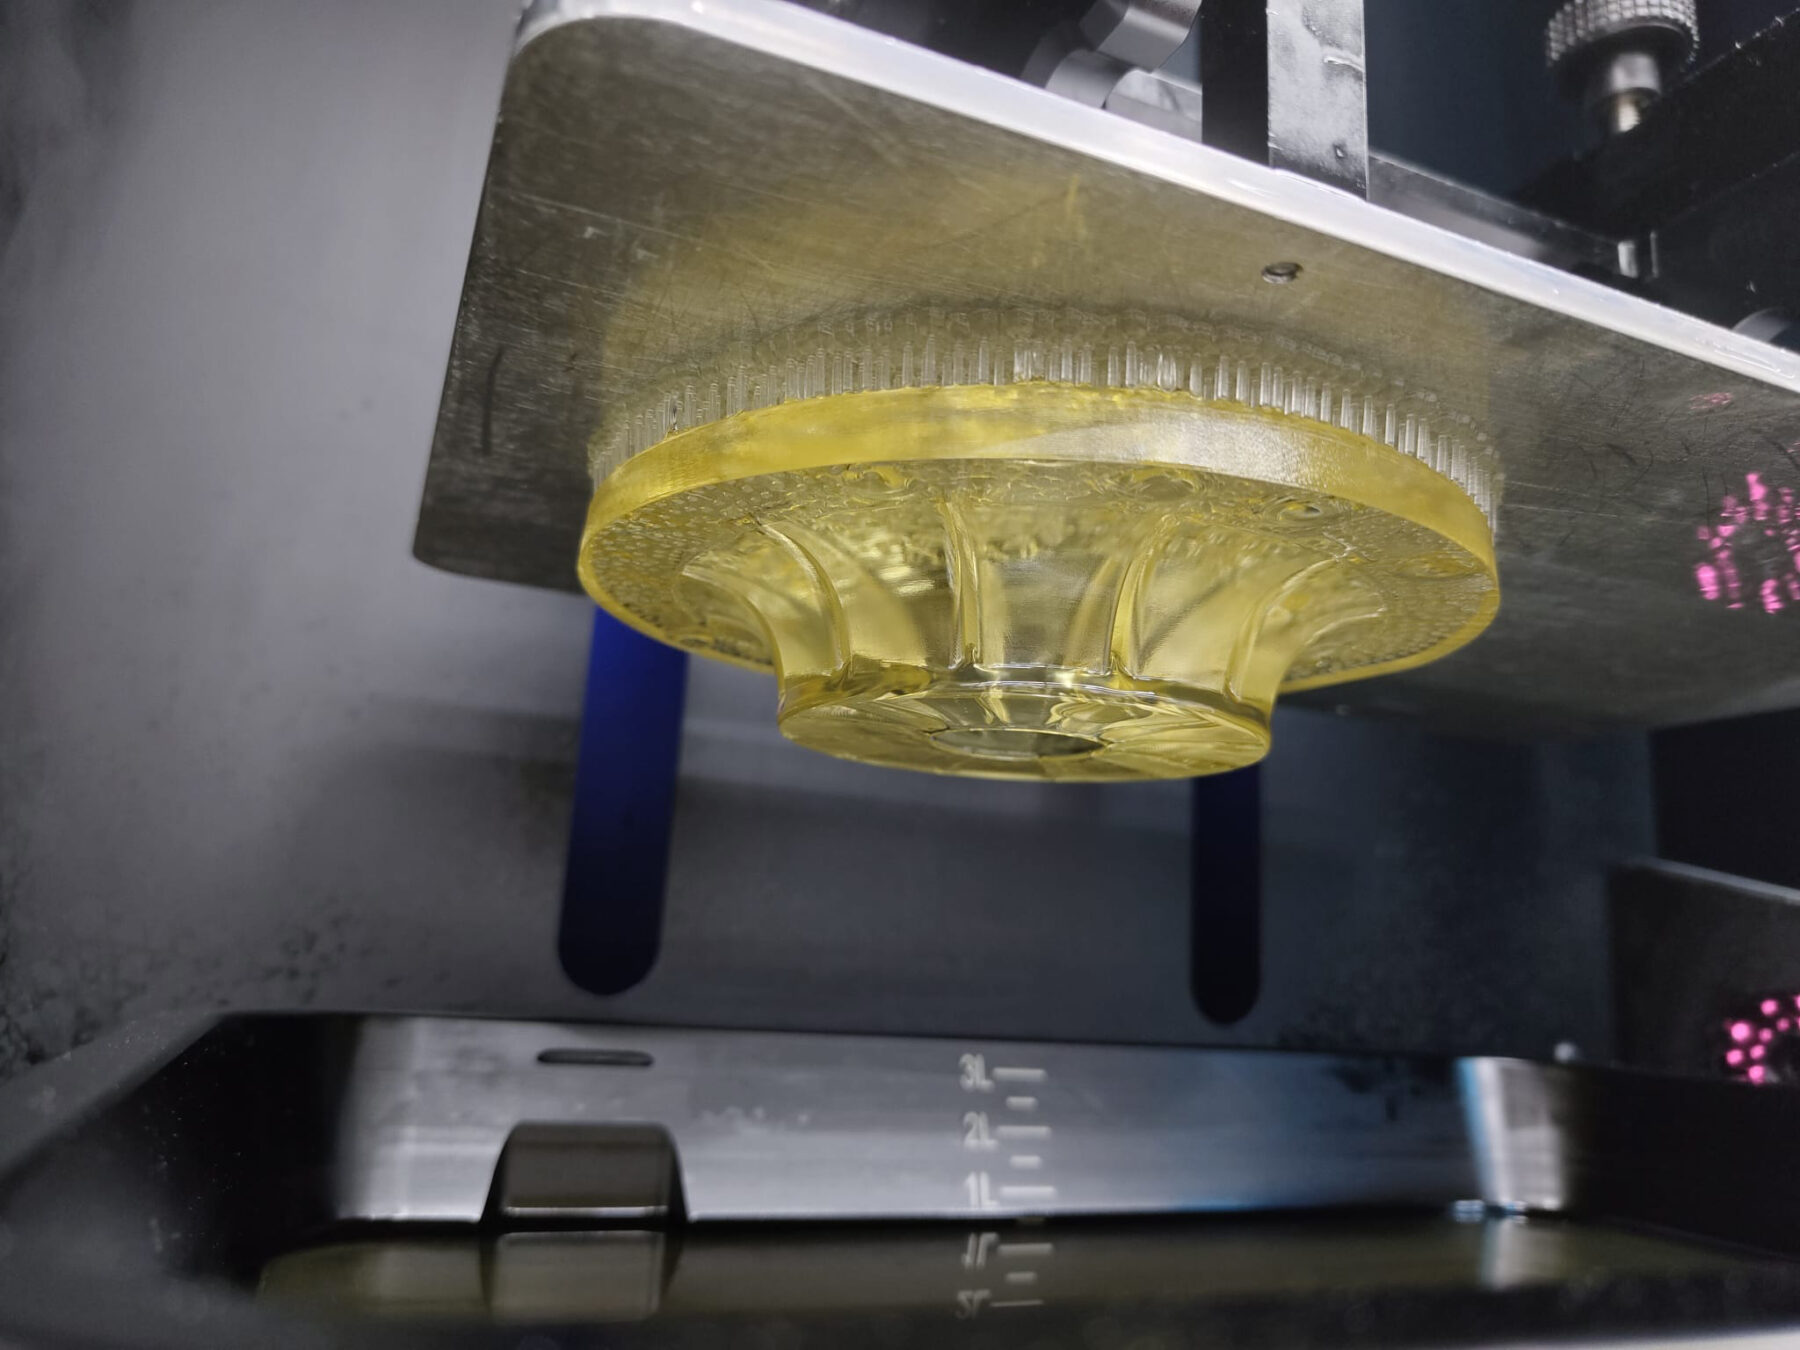 Integration of Additive Manufacturing and Injection Molding